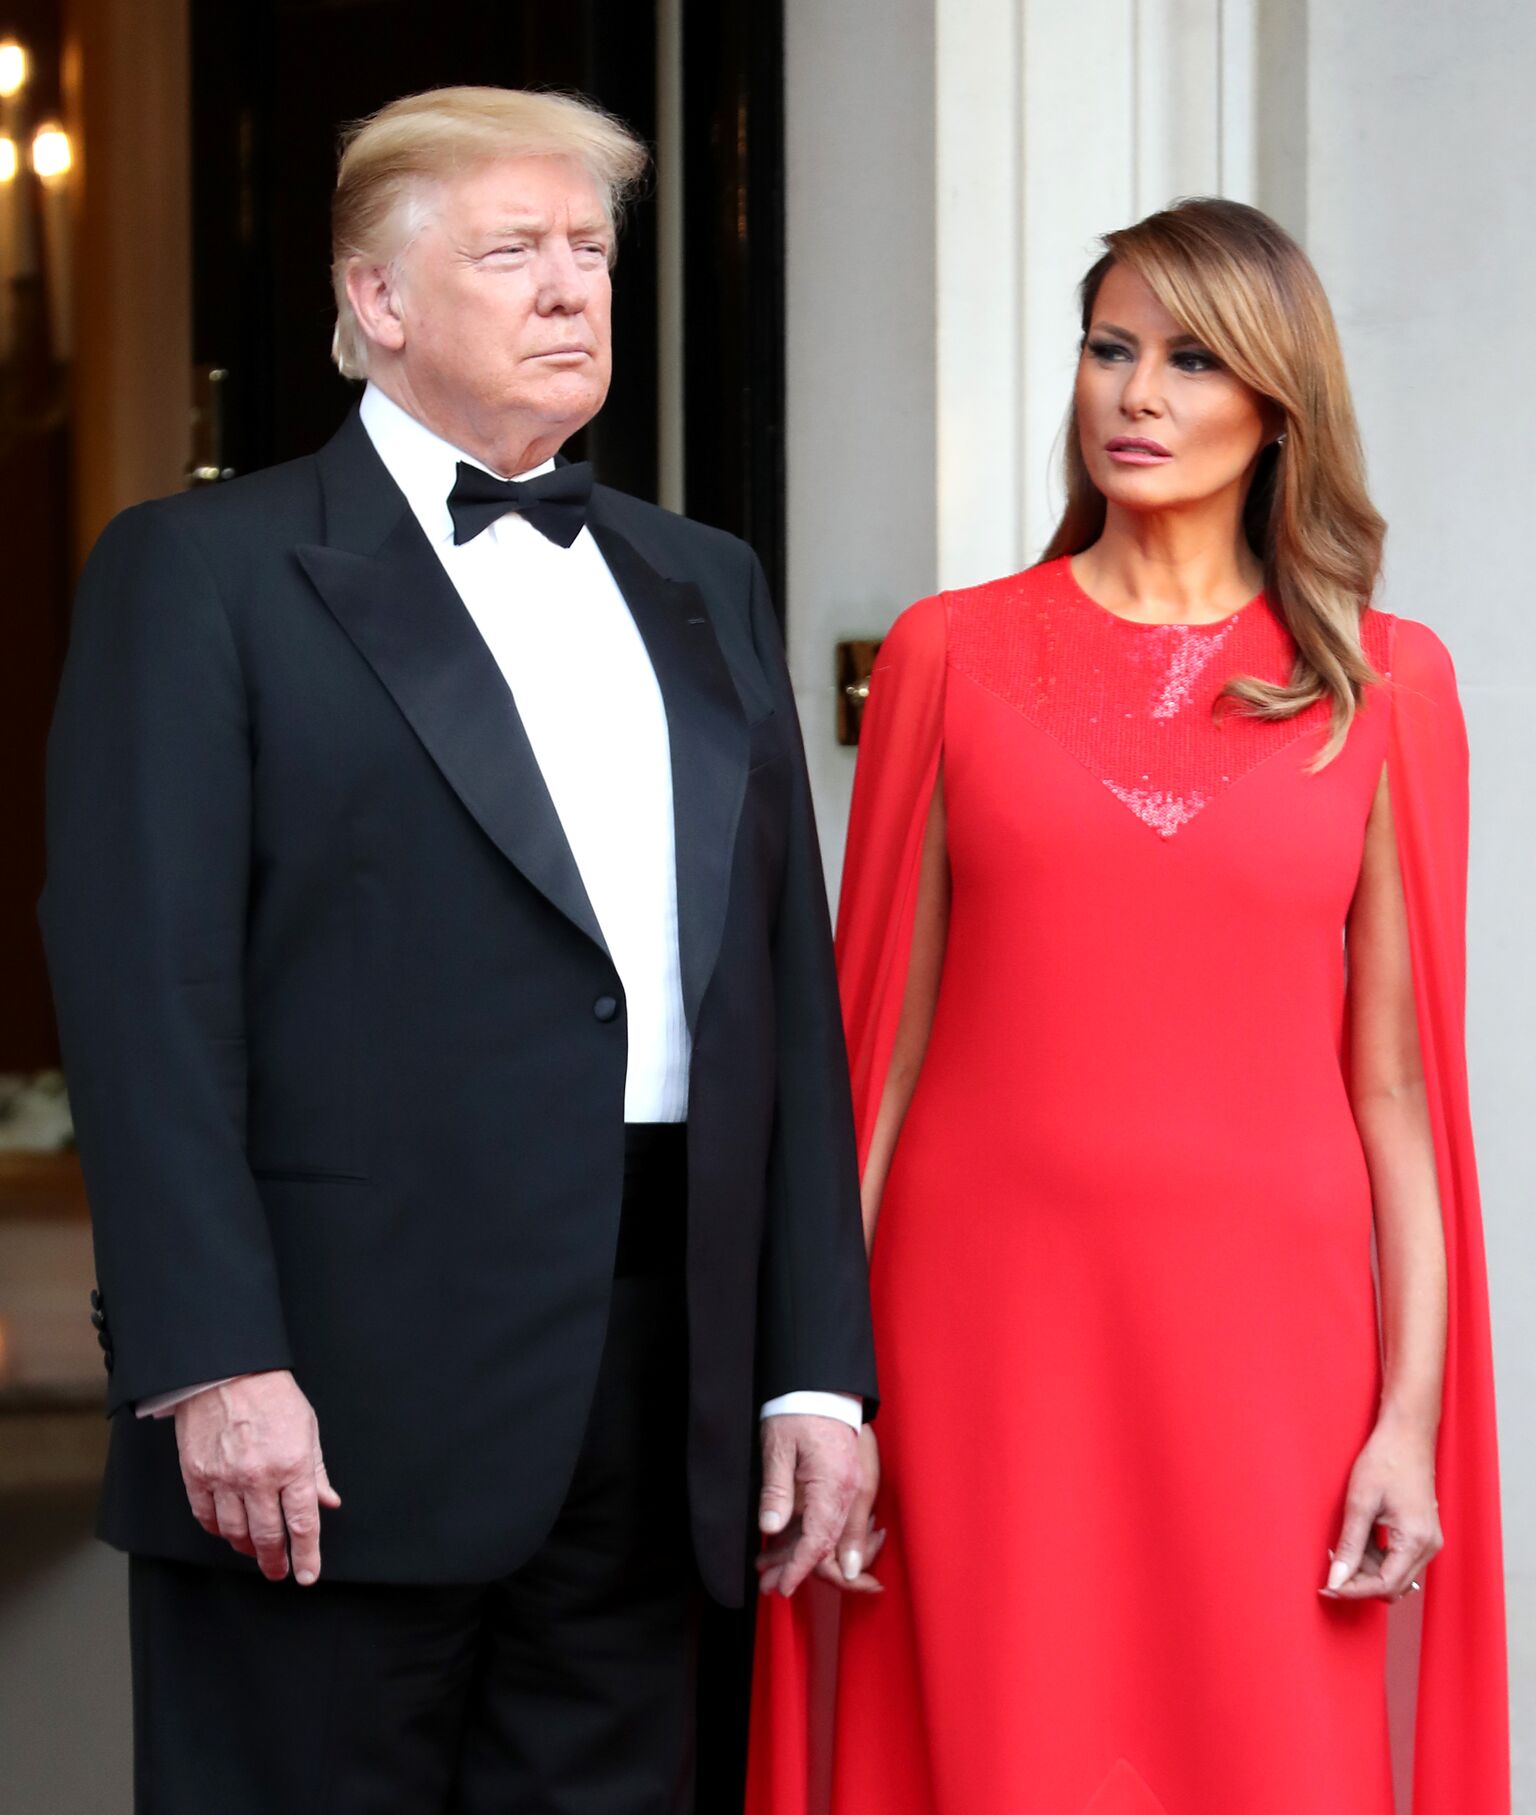 President Donald Trump and First Lady Melania Trump pose ahead of a dinner at Winfield House for Prince Charles, Prince of Wales and Camilla, Duchess of Cornwall, during their state visit on June 04, 2019 | Photo: Getty Images